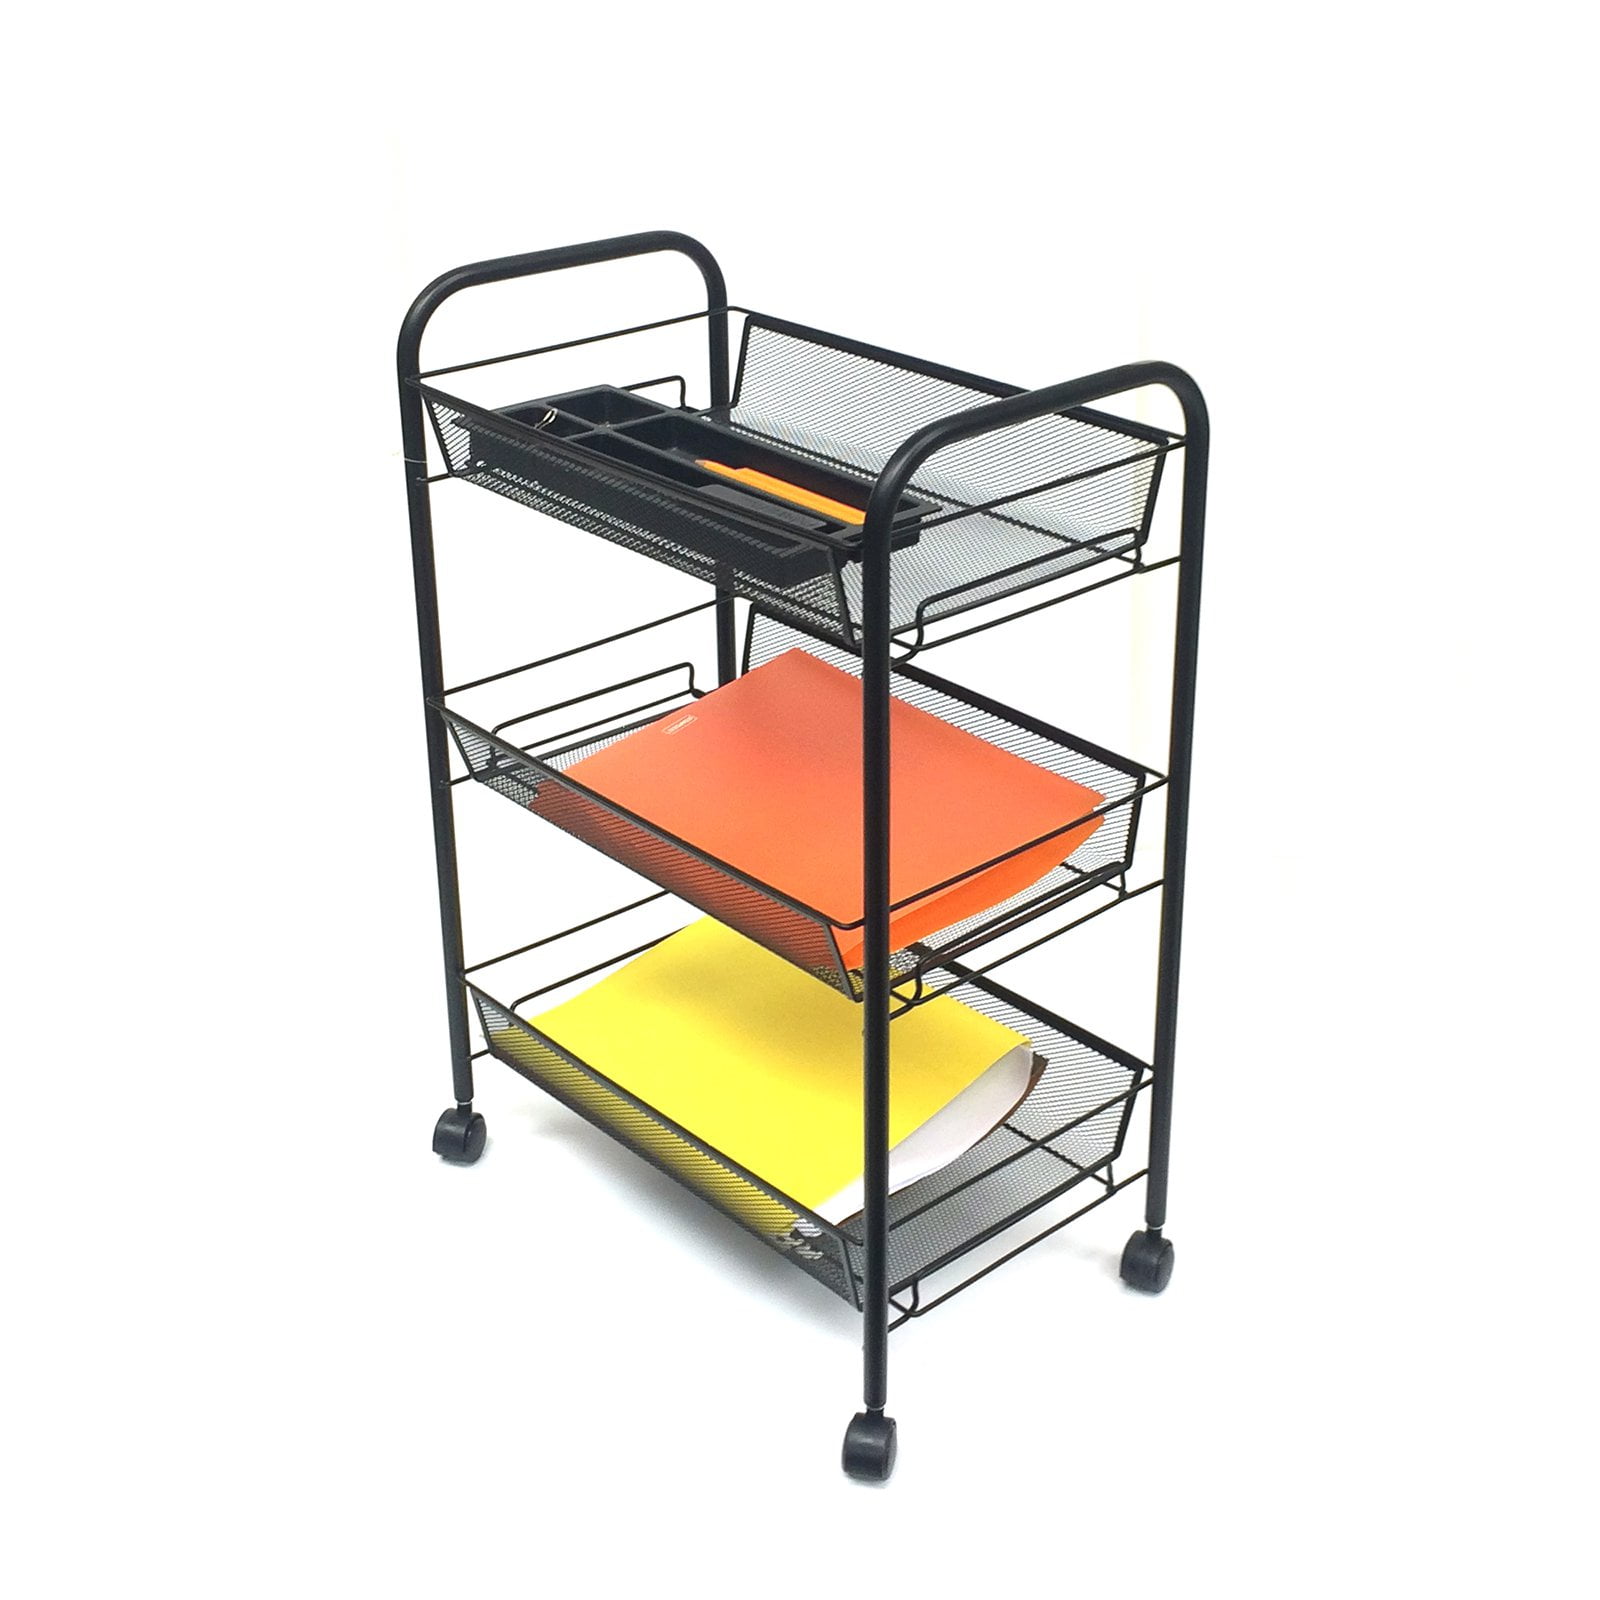 Details about   Utility Cart Trolley Organizer Storage 3Tier Tool Service Rolling Salon SpaY301D 